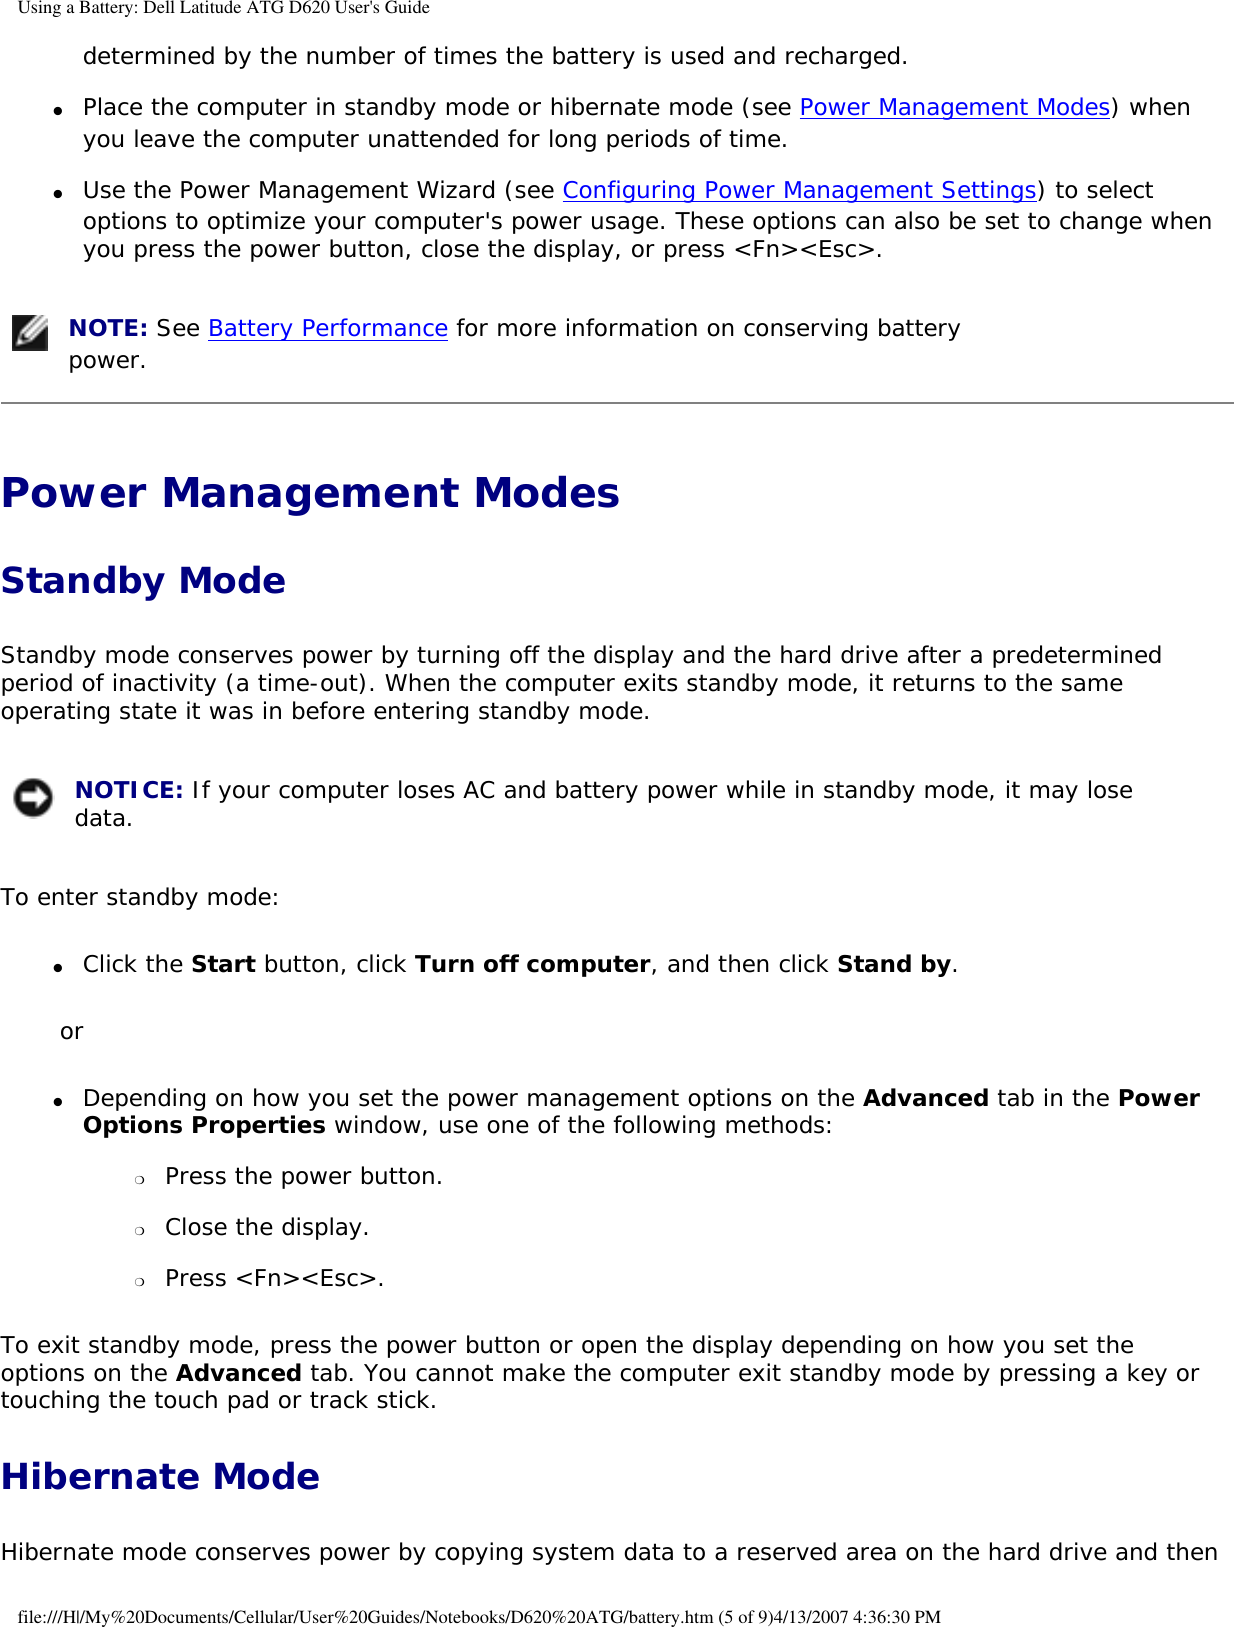 Using a Battery: Dell Latitude ATG D620 User&apos;s Guidedetermined by the number of times the battery is used and recharged.  ●     Place the computer in standby mode or hibernate mode (see Power Management Modes) when you leave the computer unattended for long periods of time.  ●     Use the Power Management Wizard (see Configuring Power Management Settings) to select options to optimize your computer&apos;s power usage. These options can also be set to change when you press the power button, close the display, or press &lt;Fn&gt;&lt;Esc&gt;.   NOTE: See Battery Performance for more information on conserving battery power. Power Management Modes Standby ModeStandby mode conserves power by turning off the display and the hard drive after a predetermined period of inactivity (a time-out). When the computer exits standby mode, it returns to the same operating state it was in before entering standby mode. NOTICE: If your computer loses AC and battery power while in standby mode, it may lose data. To enter standby mode:●     Click the Start button, click Turn off computer, and then click Stand by.  or●     Depending on how you set the power management options on the Advanced tab in the Power Options Properties window, use one of the following methods:  ❍     Press the power button.  ❍     Close the display.  ❍     Press &lt;Fn&gt;&lt;Esc&gt;.  To exit standby mode, press the power button or open the display depending on how you set the options on the Advanced tab. You cannot make the computer exit standby mode by pressing a key or touching the touch pad or track stick.Hibernate ModeHibernate mode conserves power by copying system data to a reserved area on the hard drive and then file:///H|/My%20Documents/Cellular/User%20Guides/Notebooks/D620%20ATG/battery.htm (5 of 9)4/13/2007 4:36:30 PM